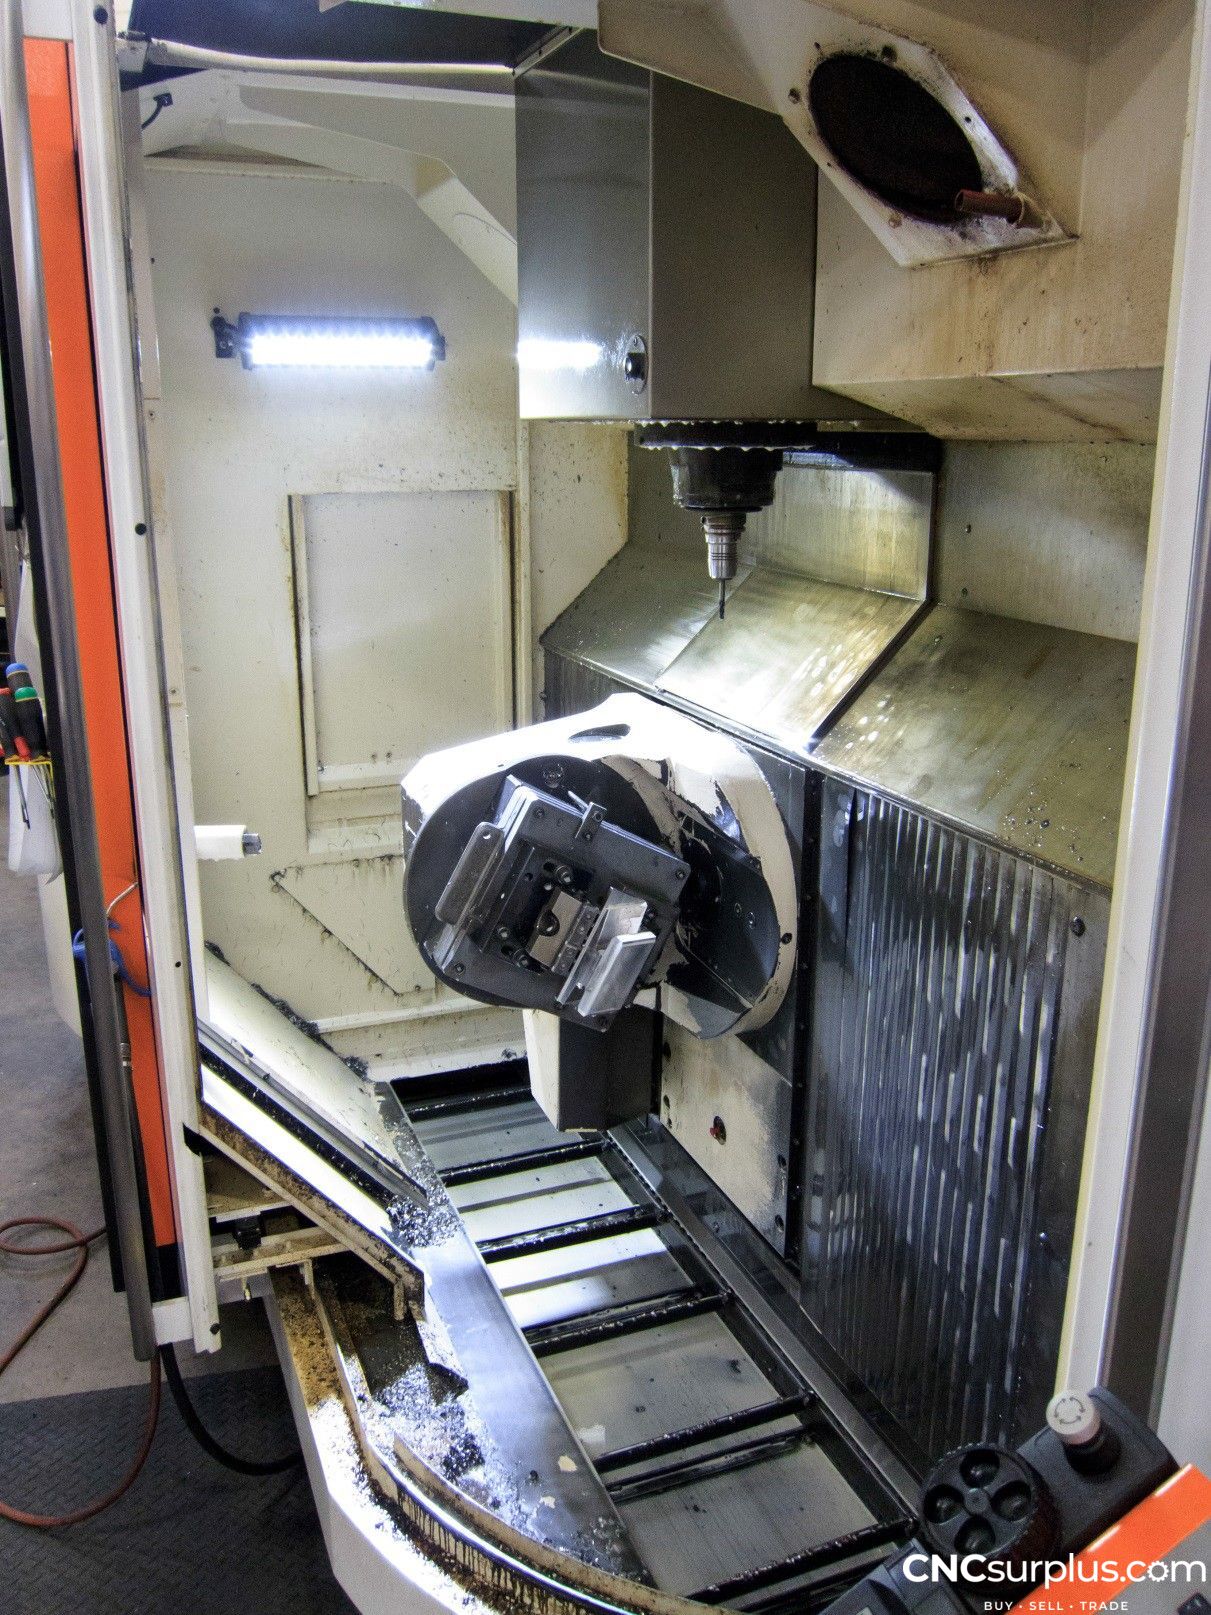 2009 +GF+ MIKRON UCP 600 VARIO Vertical Machining Centers (5-Axis or More) | CNCsurplus, A Div. of Comtex Leasing Corp.